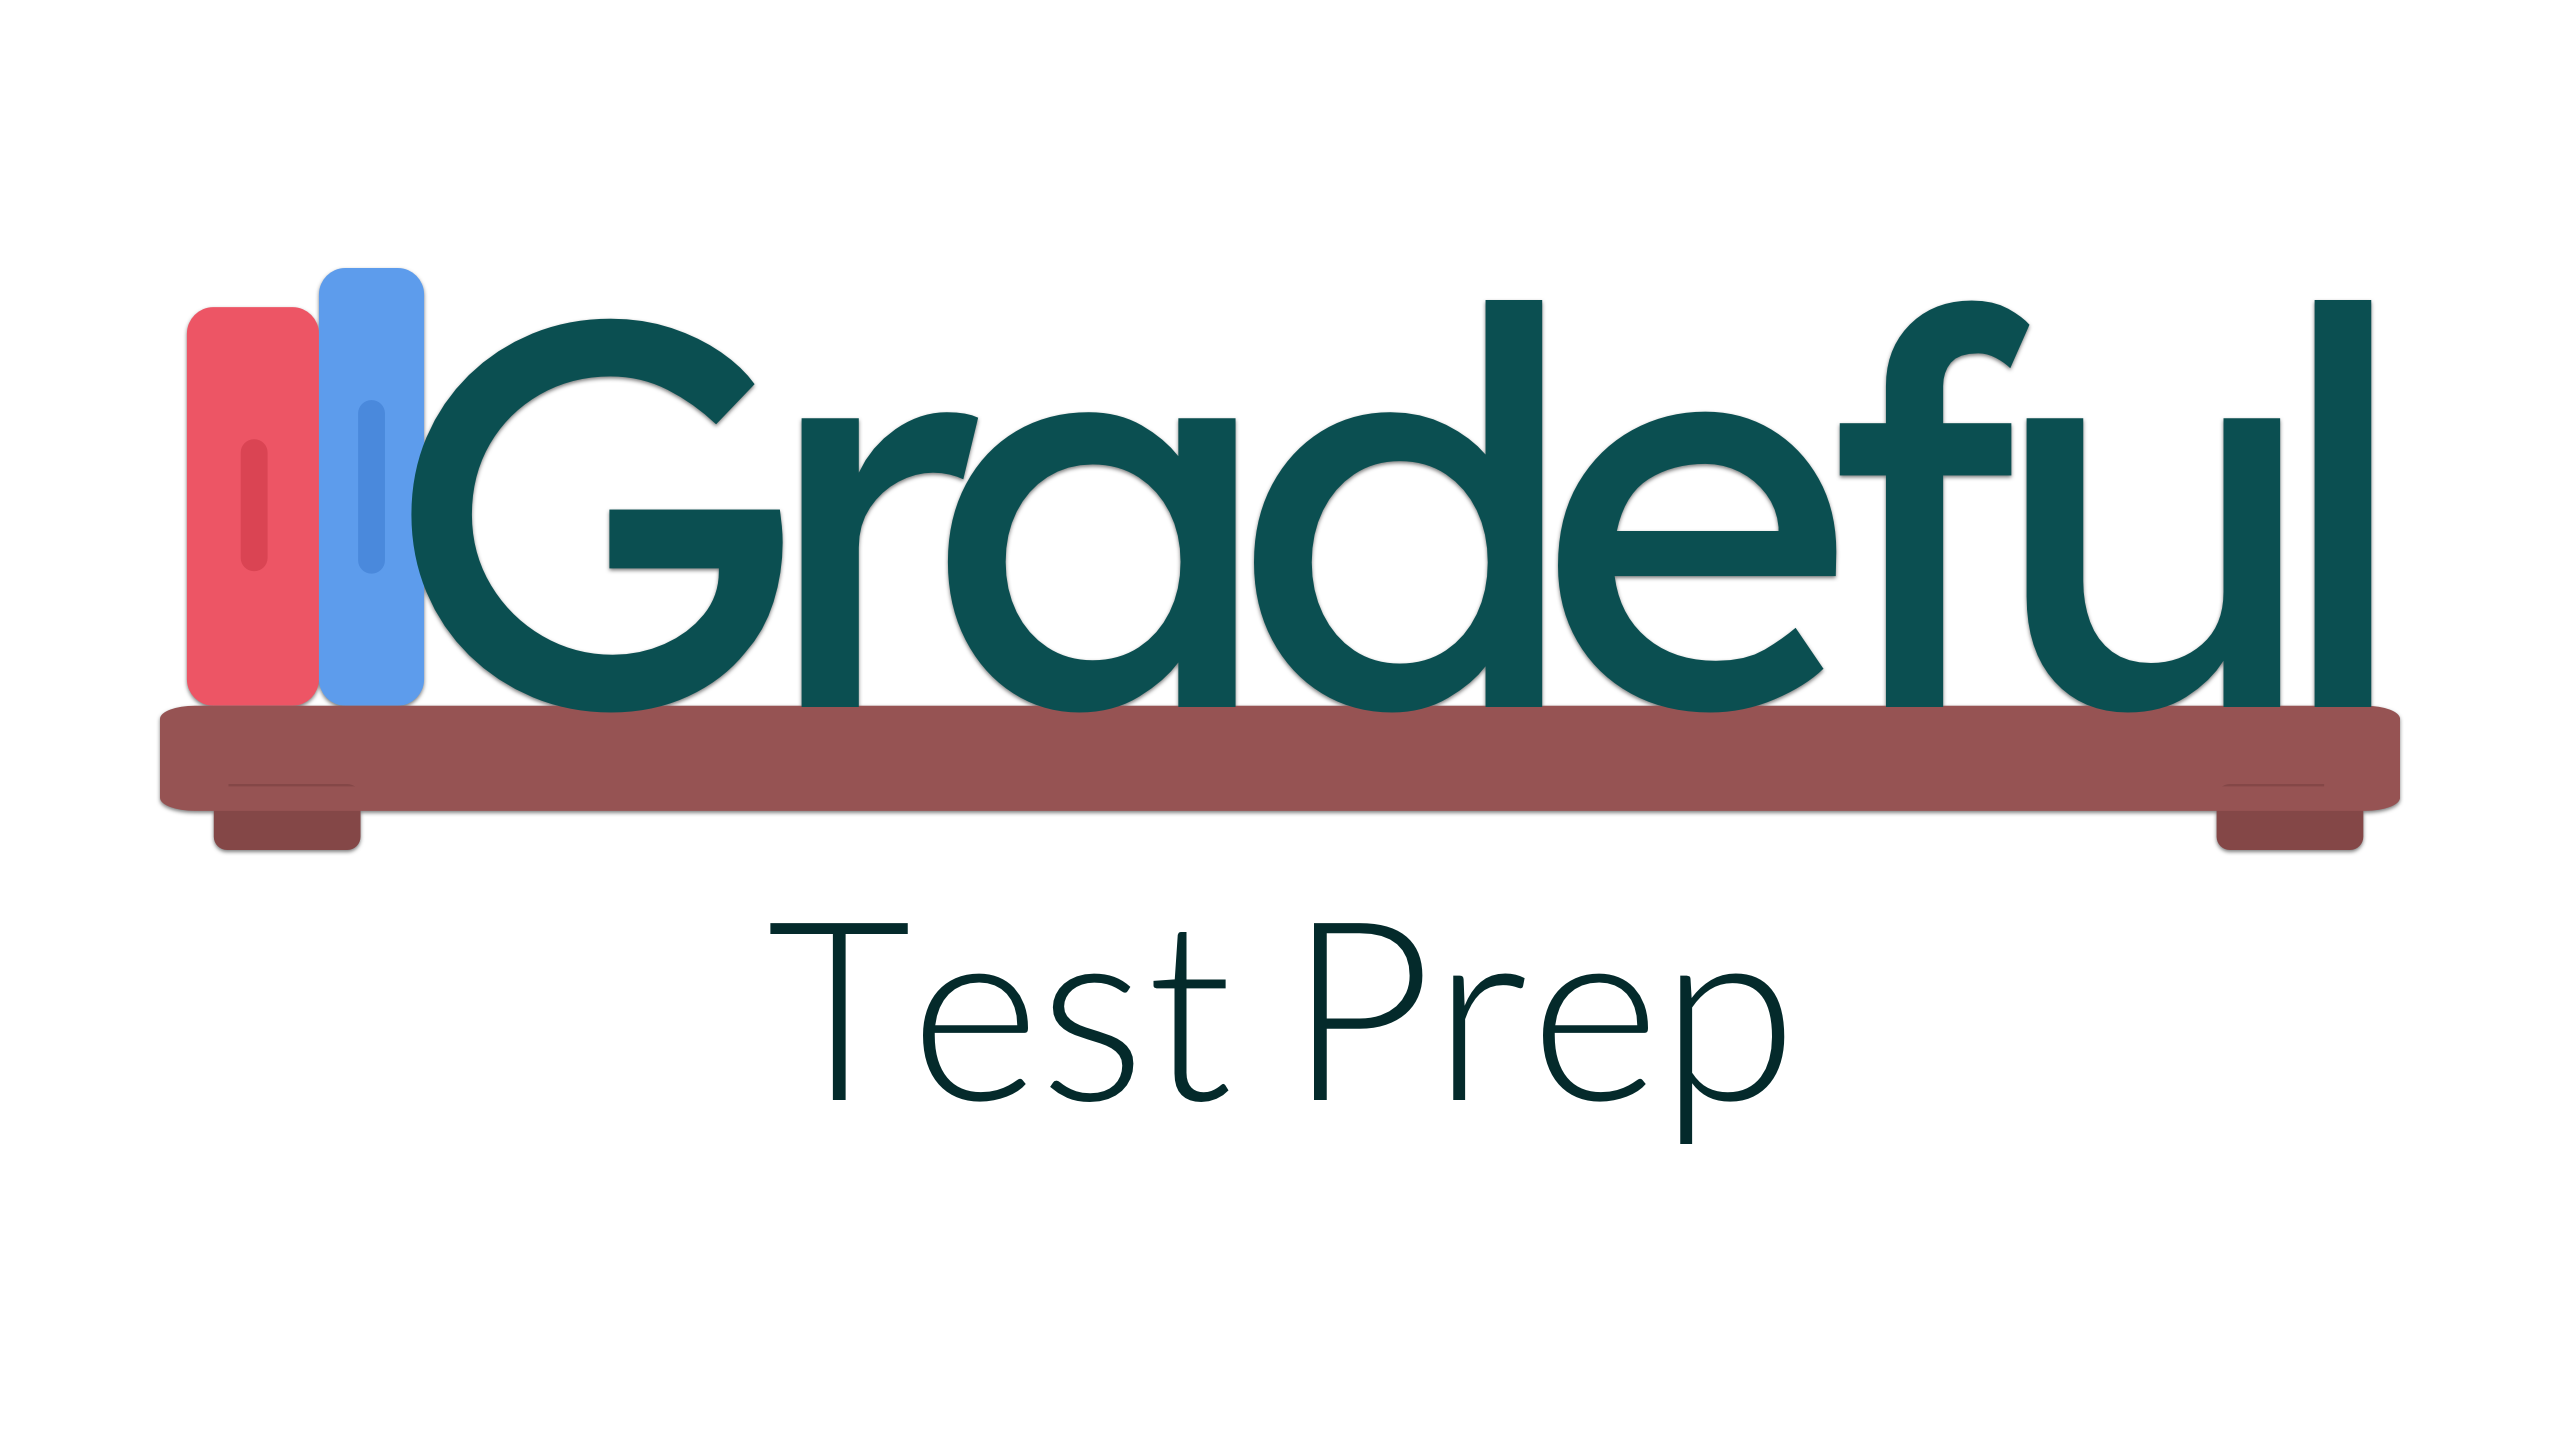 For Effective Test Prep